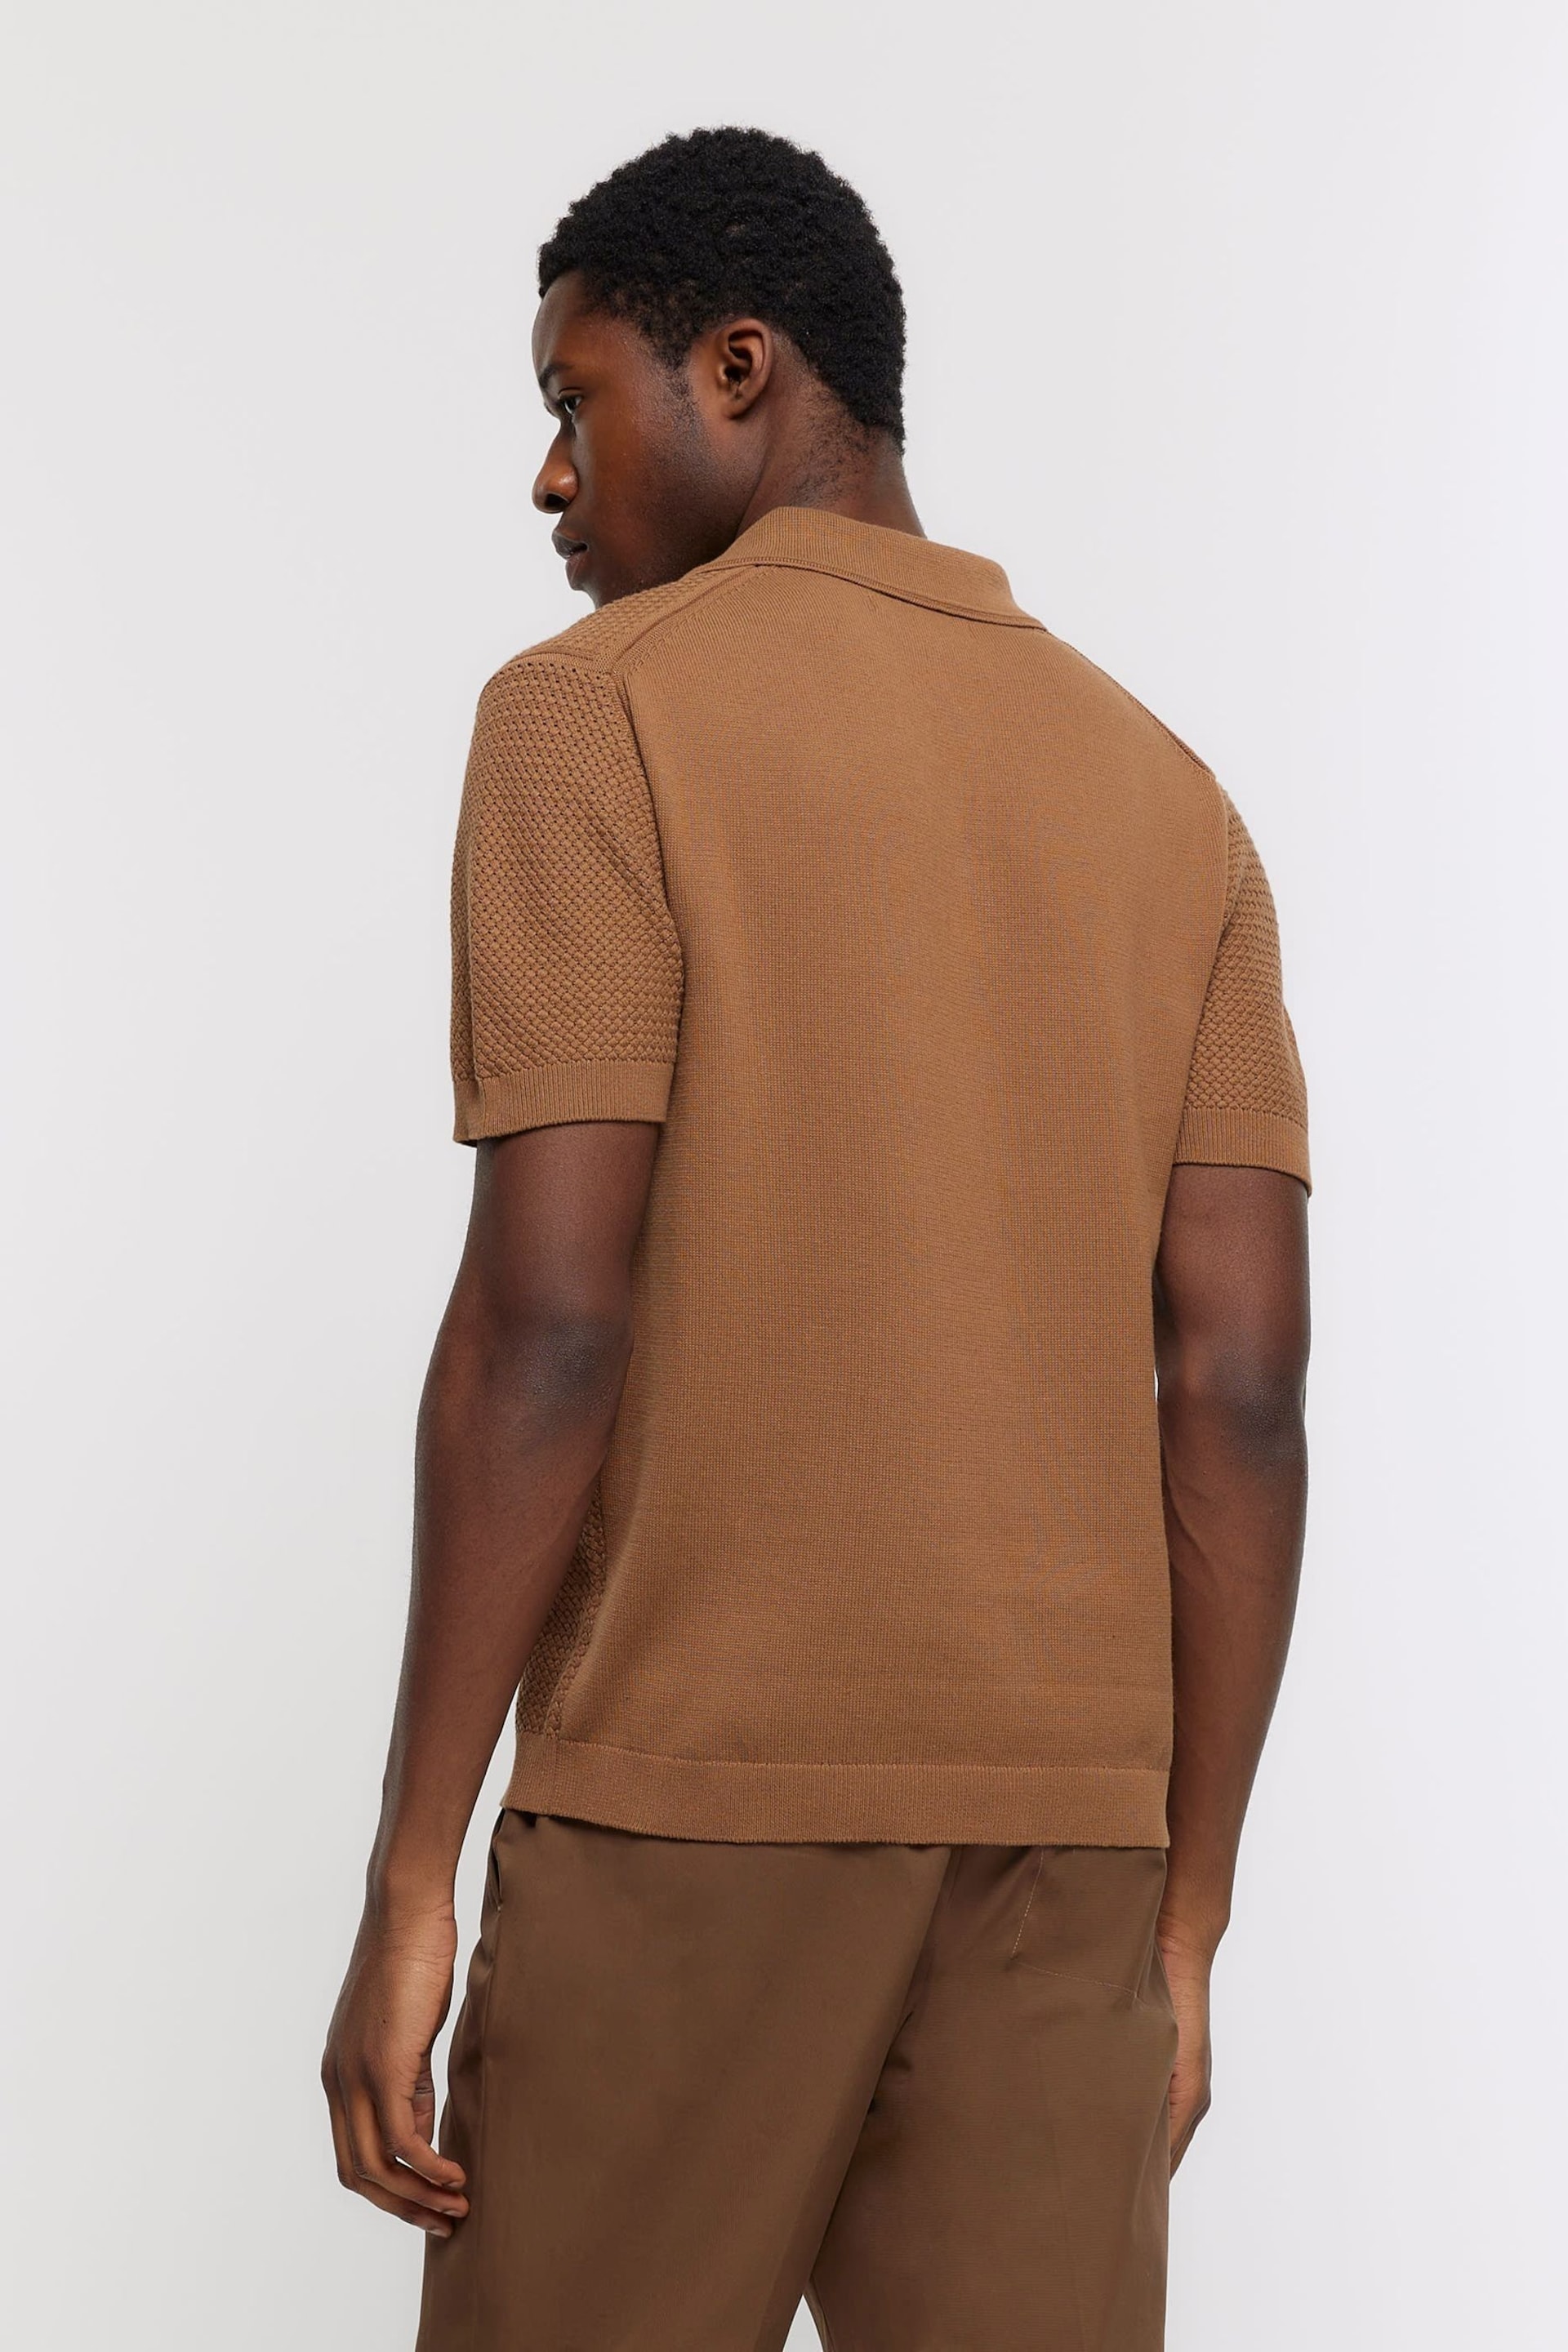 River Island Brown Textured Knitted Polo Shirt - Image 2 of 4